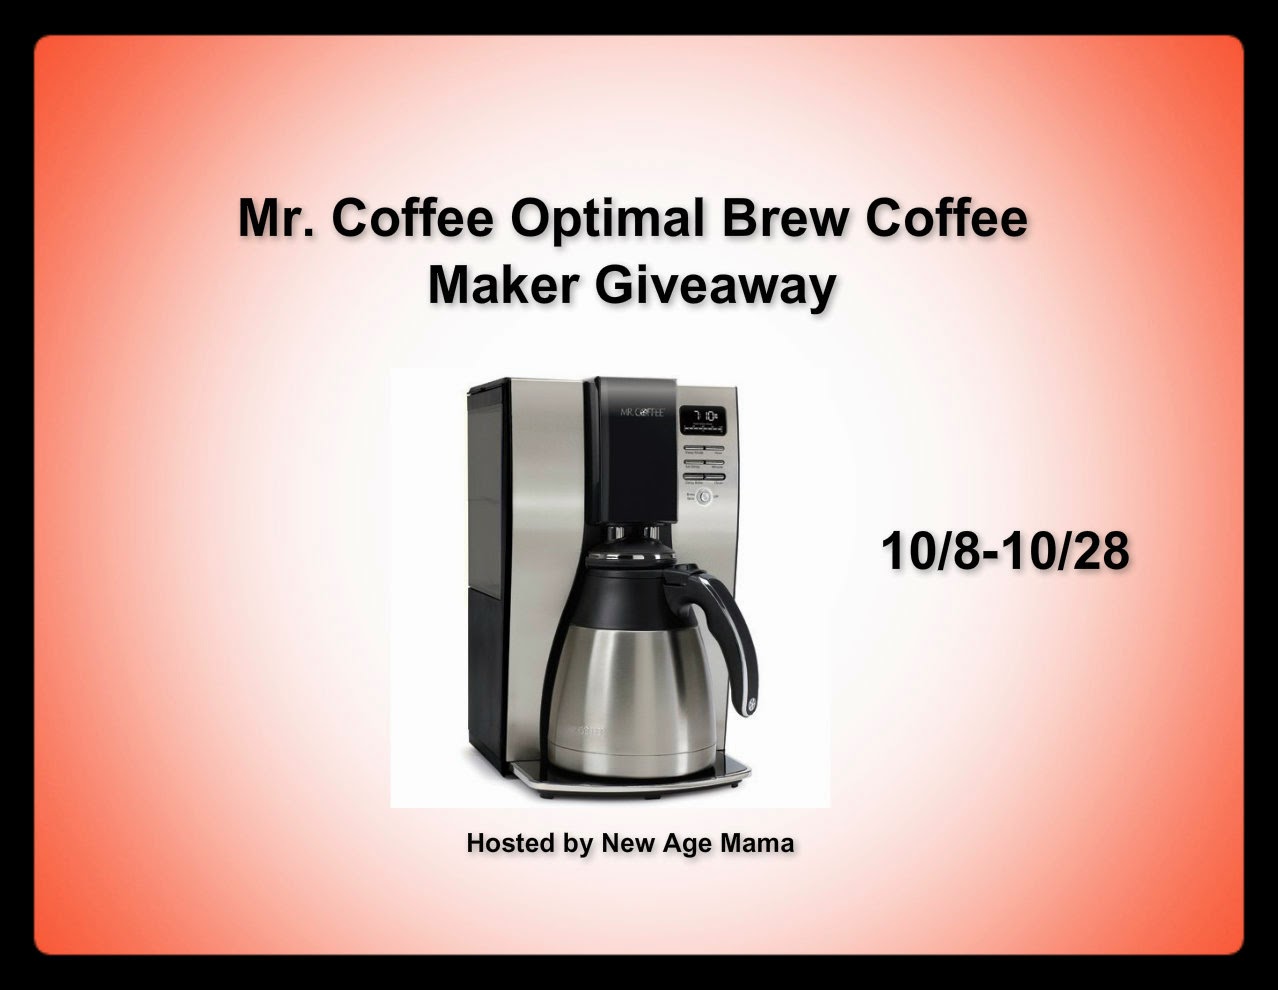 Mr. Coffee Optimal Brew Coffee Maker Giveaway (Ends 10/28/14) - It's